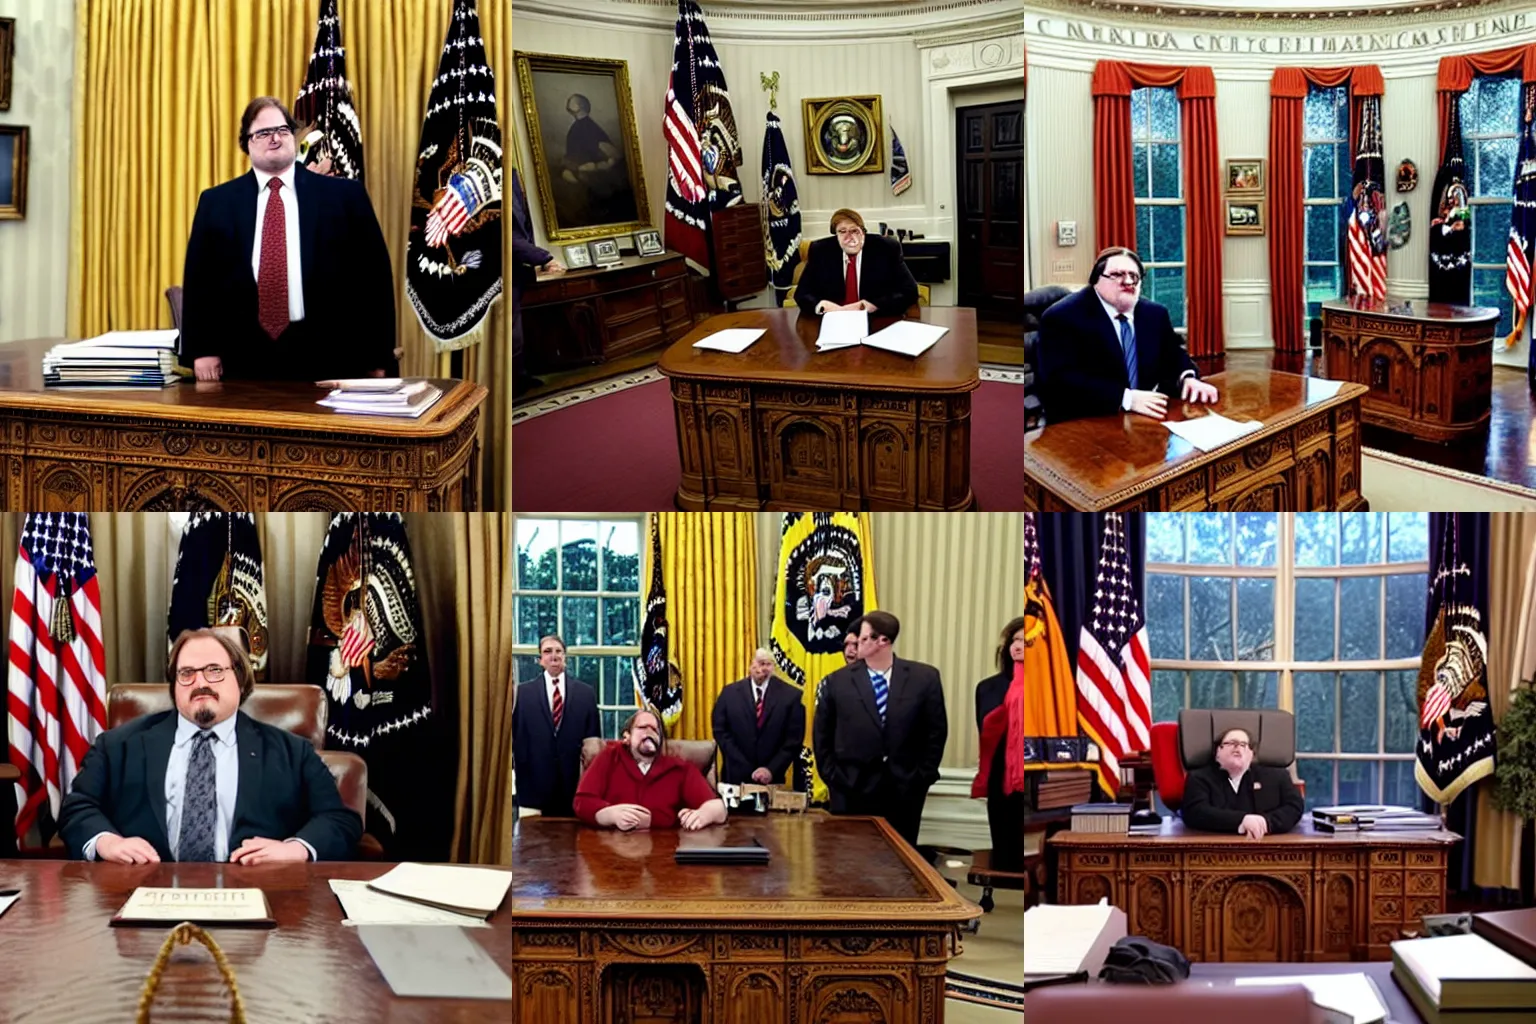 Prompt: President Gabe Newell gives an emergency presidential address from the oval office, sitting behind the resolute desk, live broadcast footage on C-SPAN